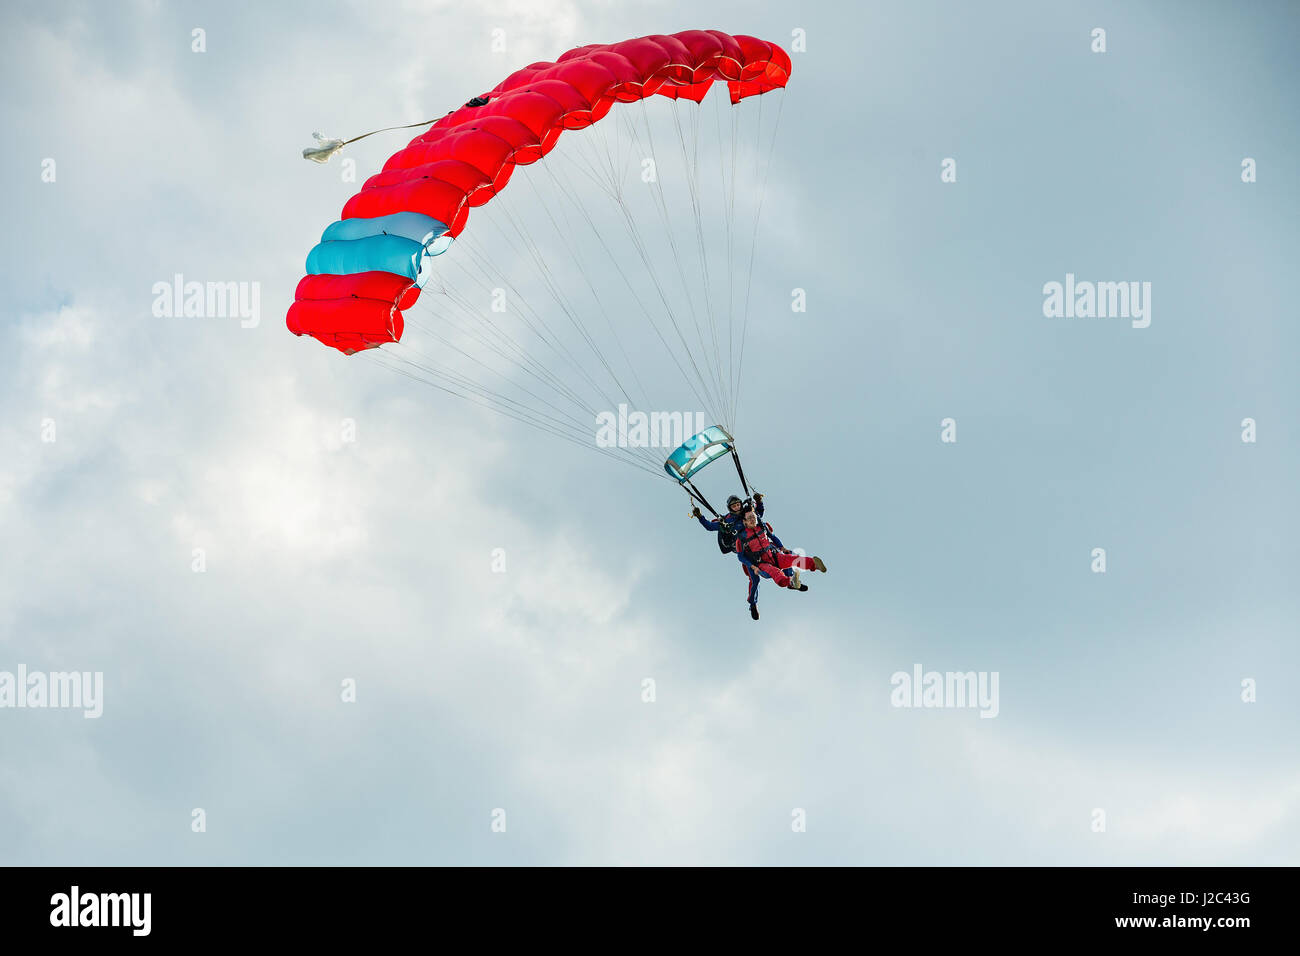 Pribram, CZE - August 19, 2016. Tandem red paraglider flying against the cloudy sky in Pribram airport, Czech Republic Stock Photo